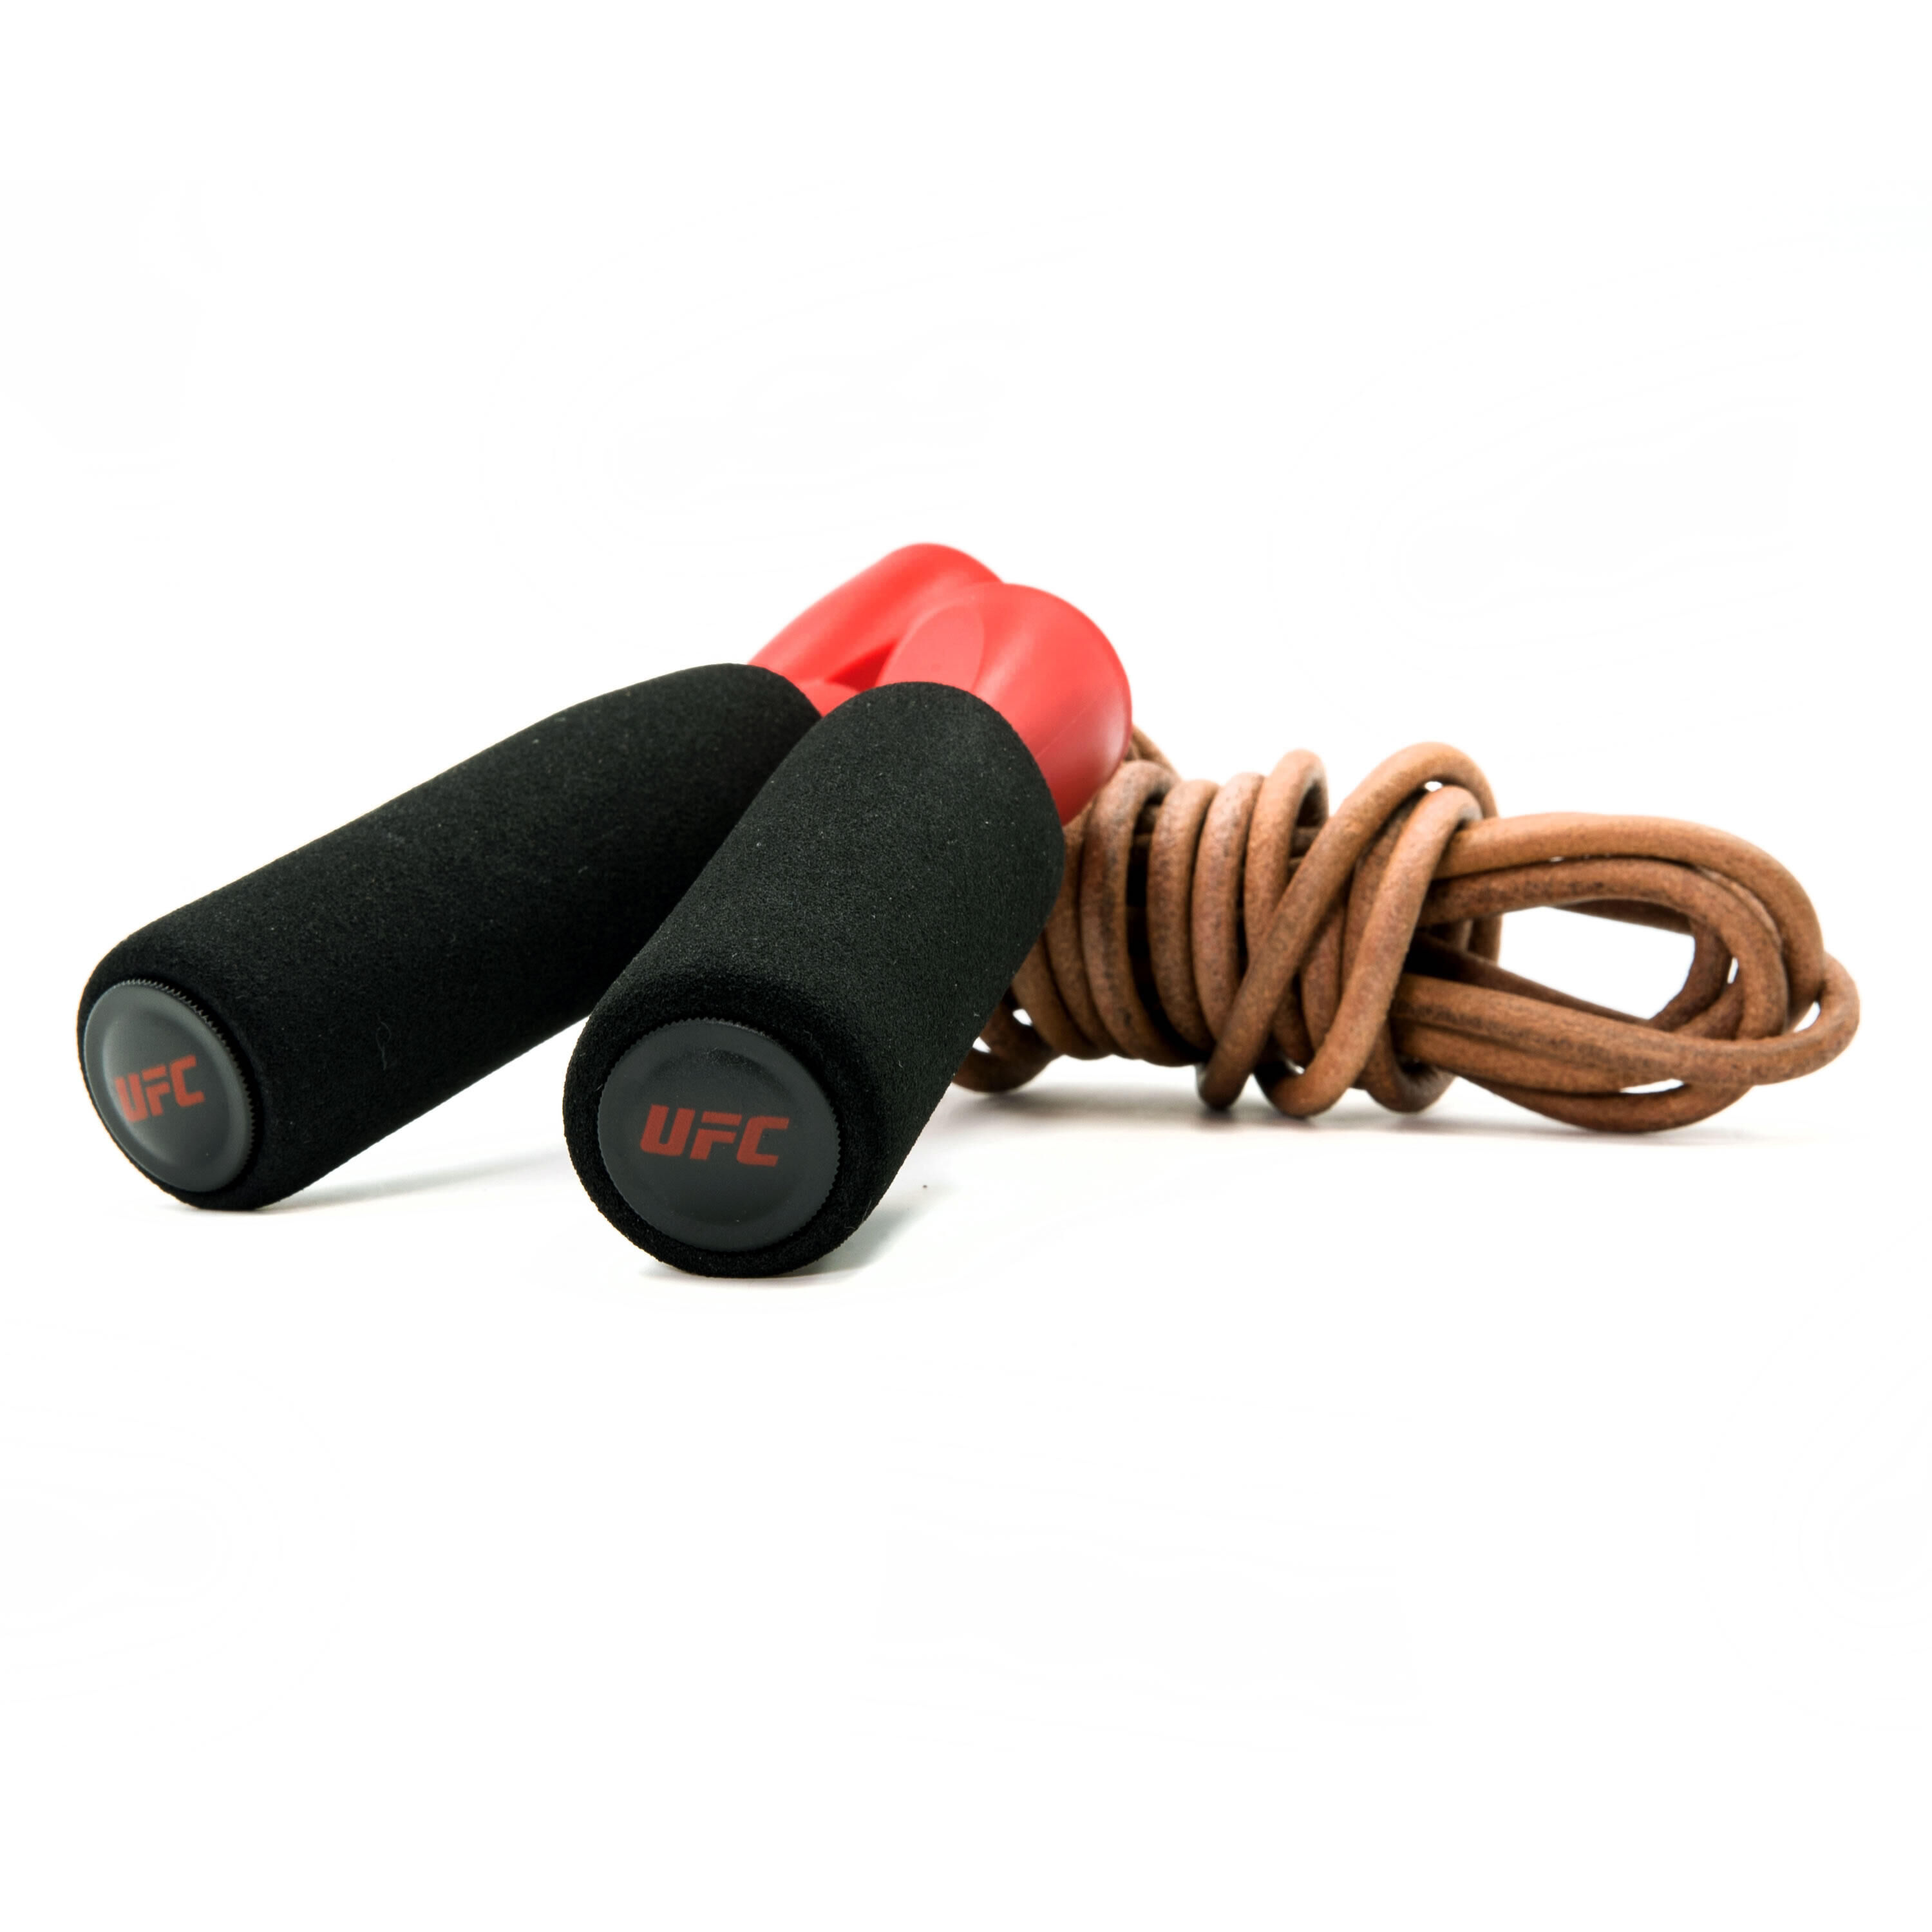 UFC ULTIMATE TRAINING UFC Leather Jump Skipping Rope